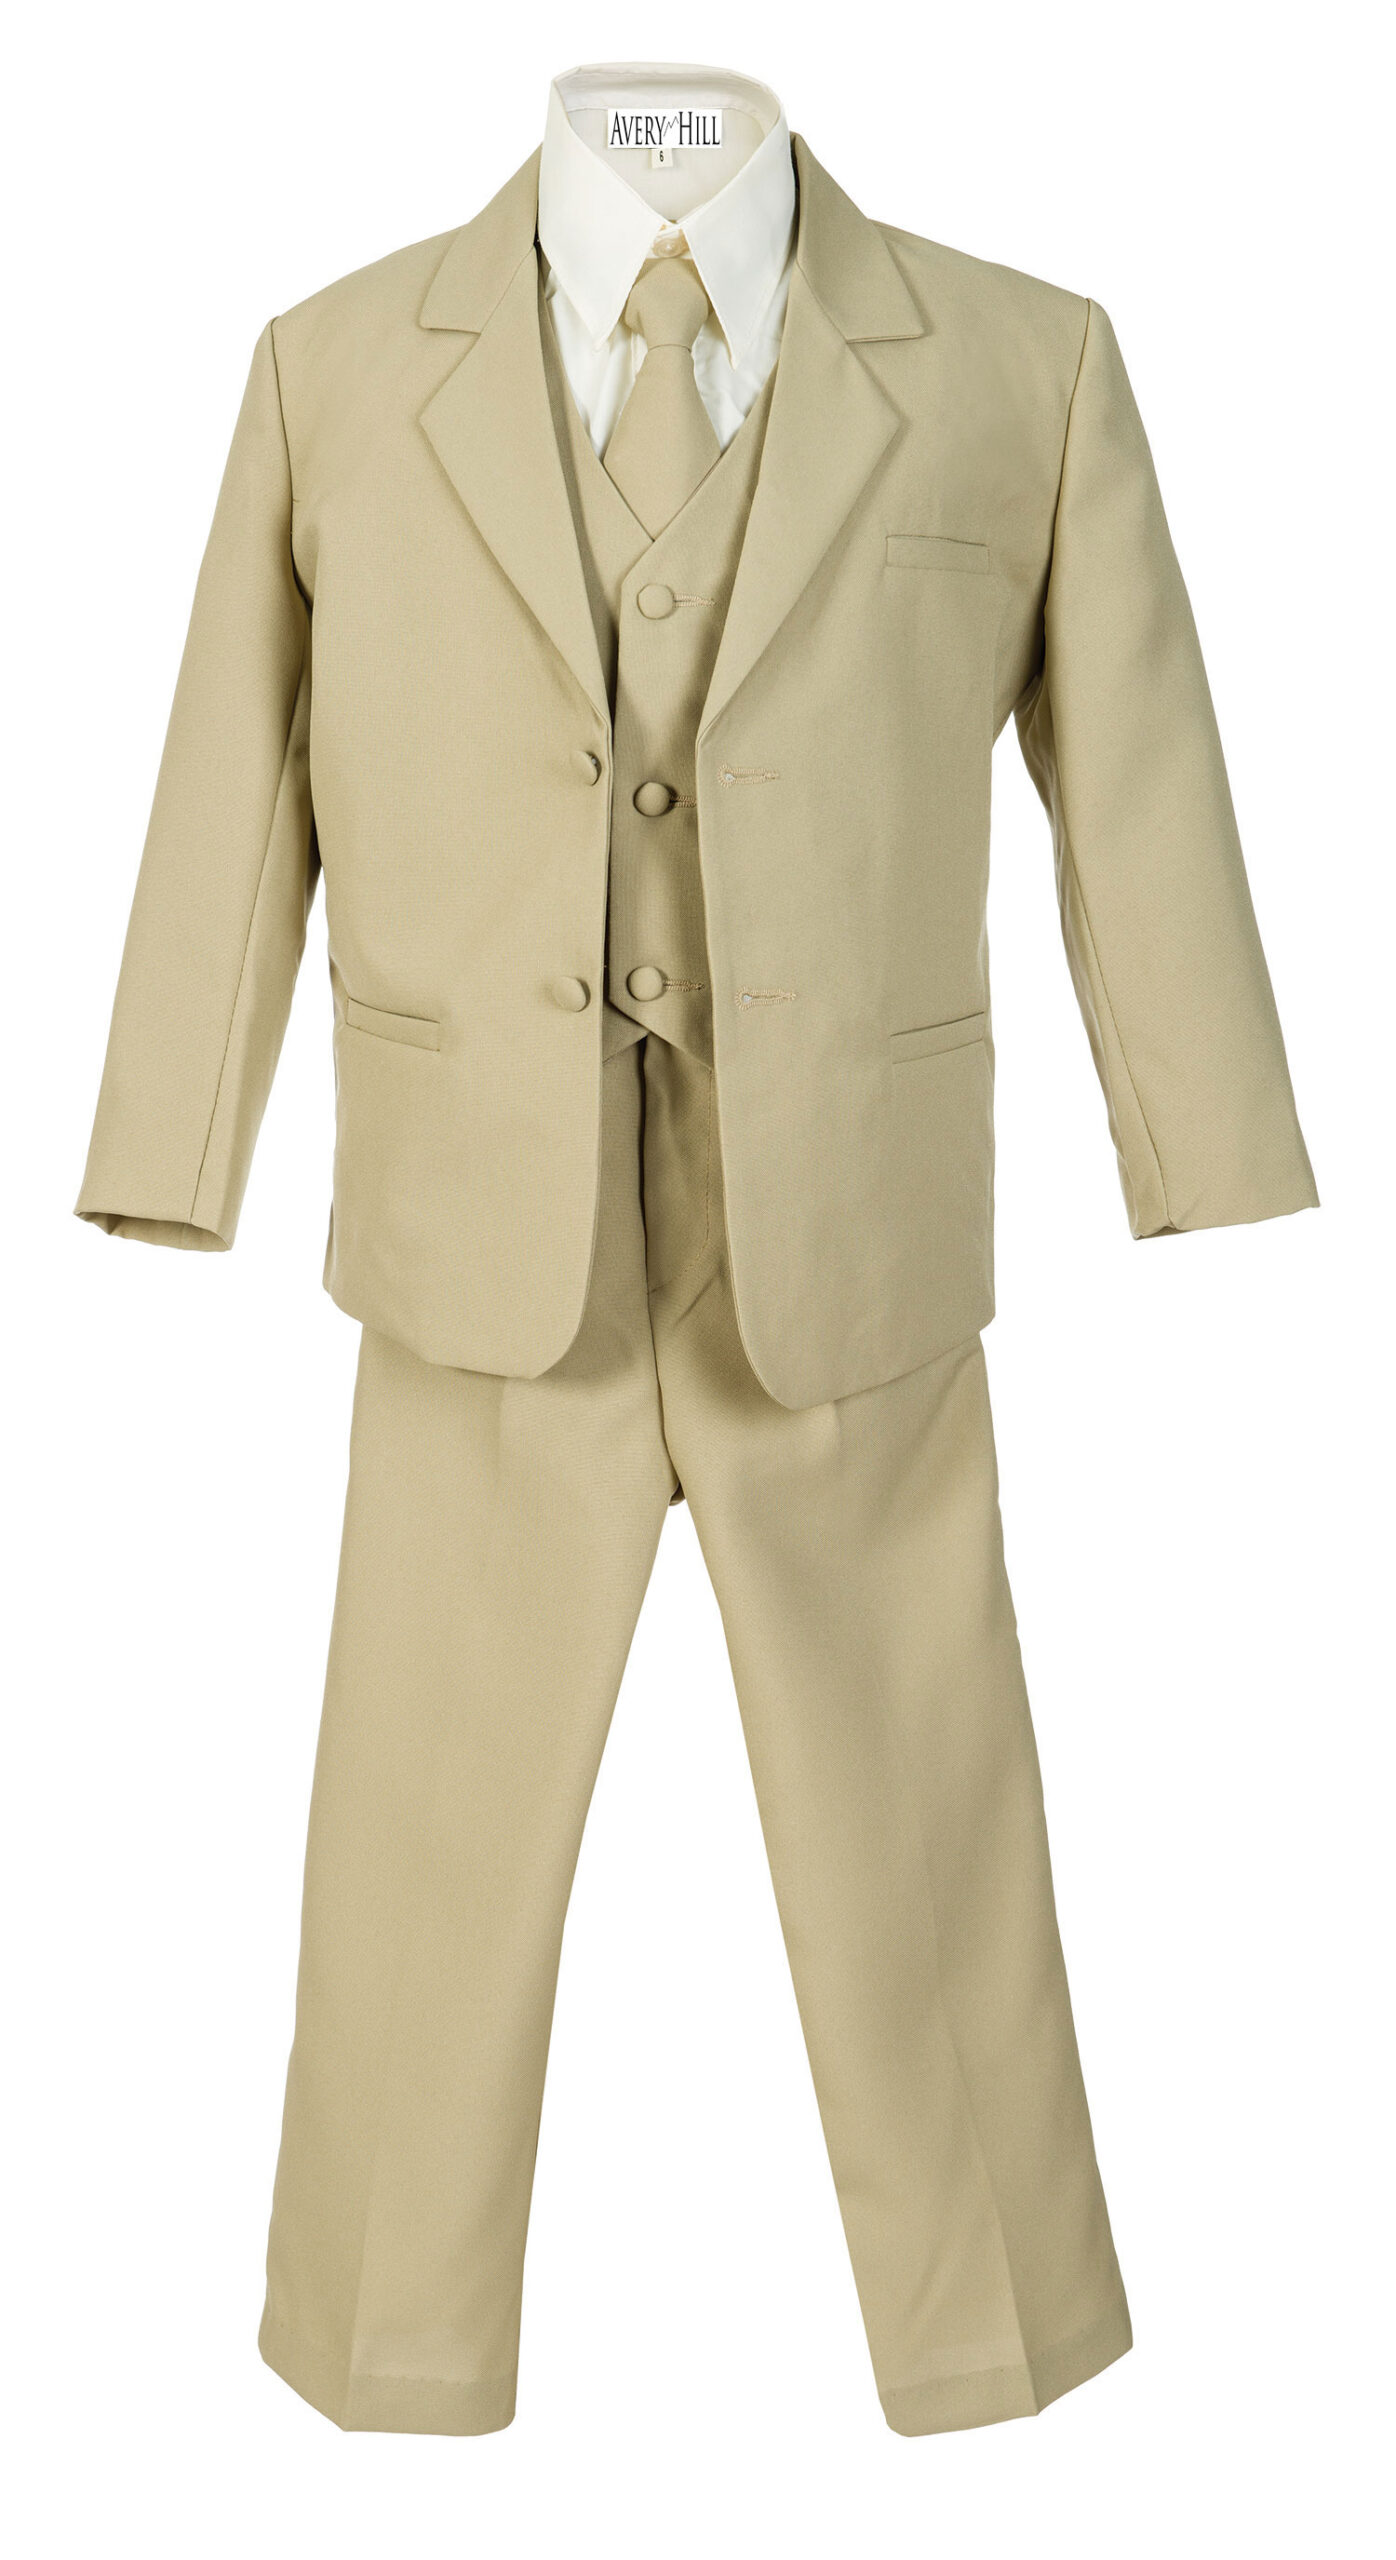 Avery Hill Boys Formal 5 Piece Suit with Shirt and Vest Khaki - 10